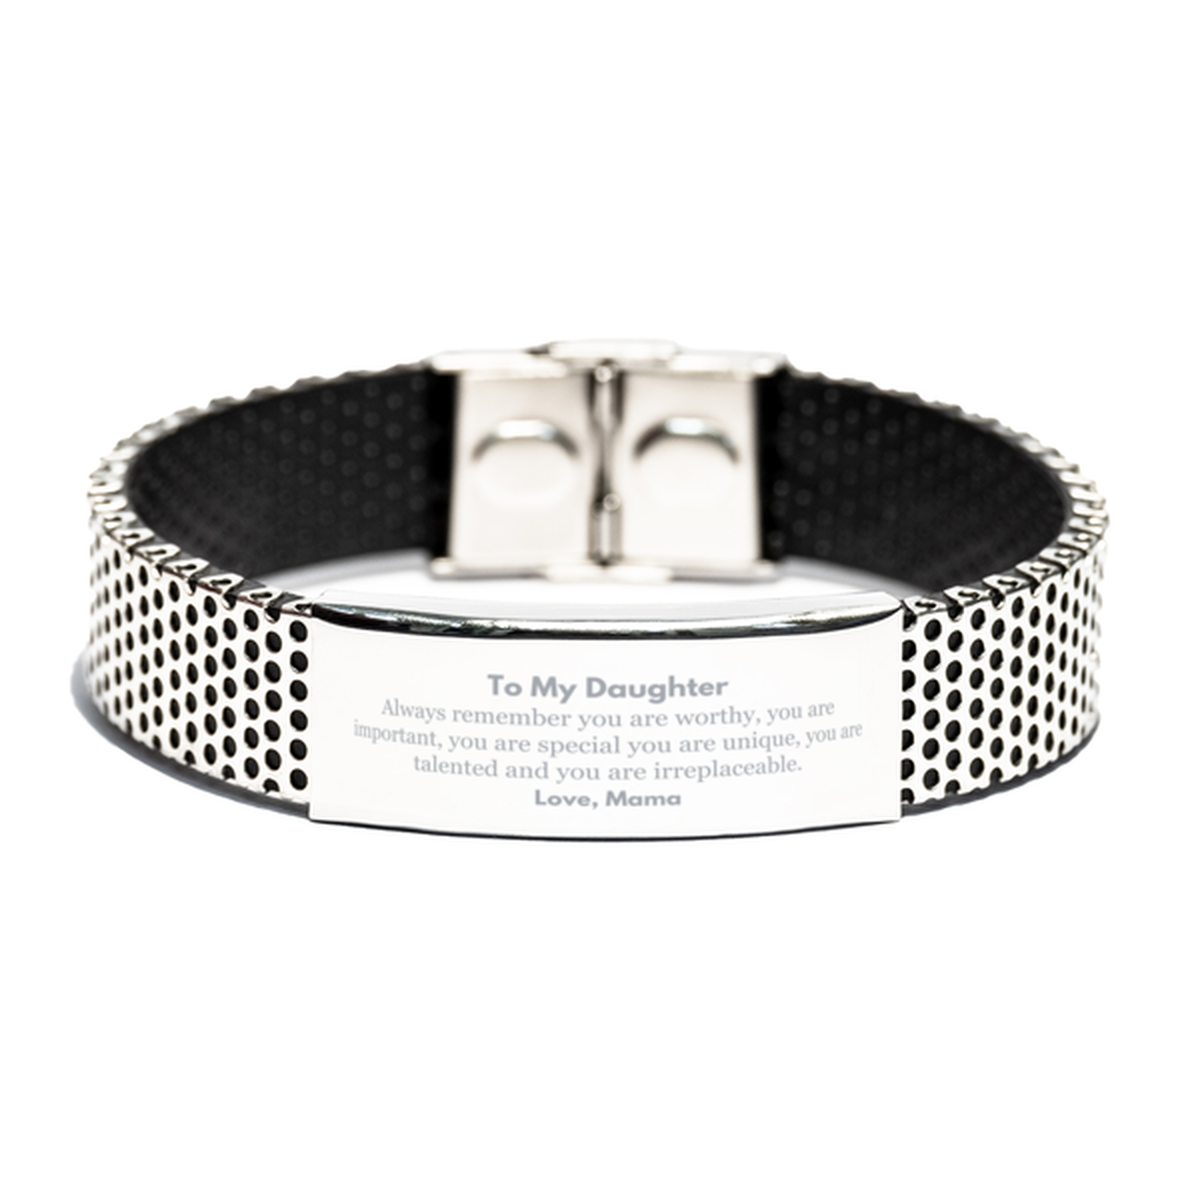 Daughter Birthday Gifts from Mama, Inspirational Stainless Steel Bracelet for Daughter Christmas Graduation Gifts for Daughter Always remember you are worthy, you are important. Love, Mama